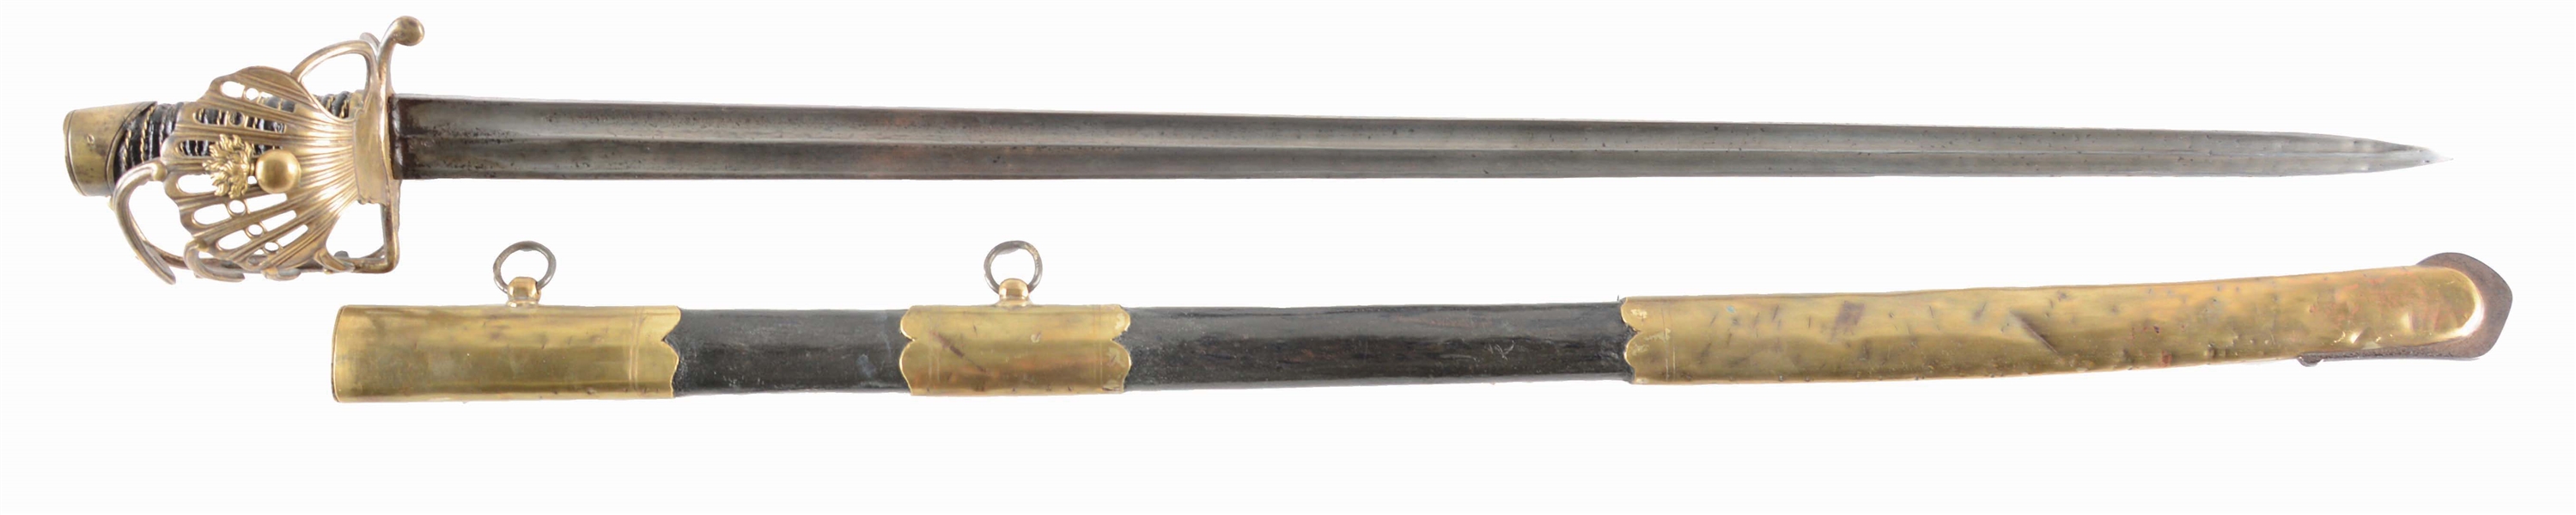 SCARCE FRENCH OFFICERS SABER WITH SCABBARD.